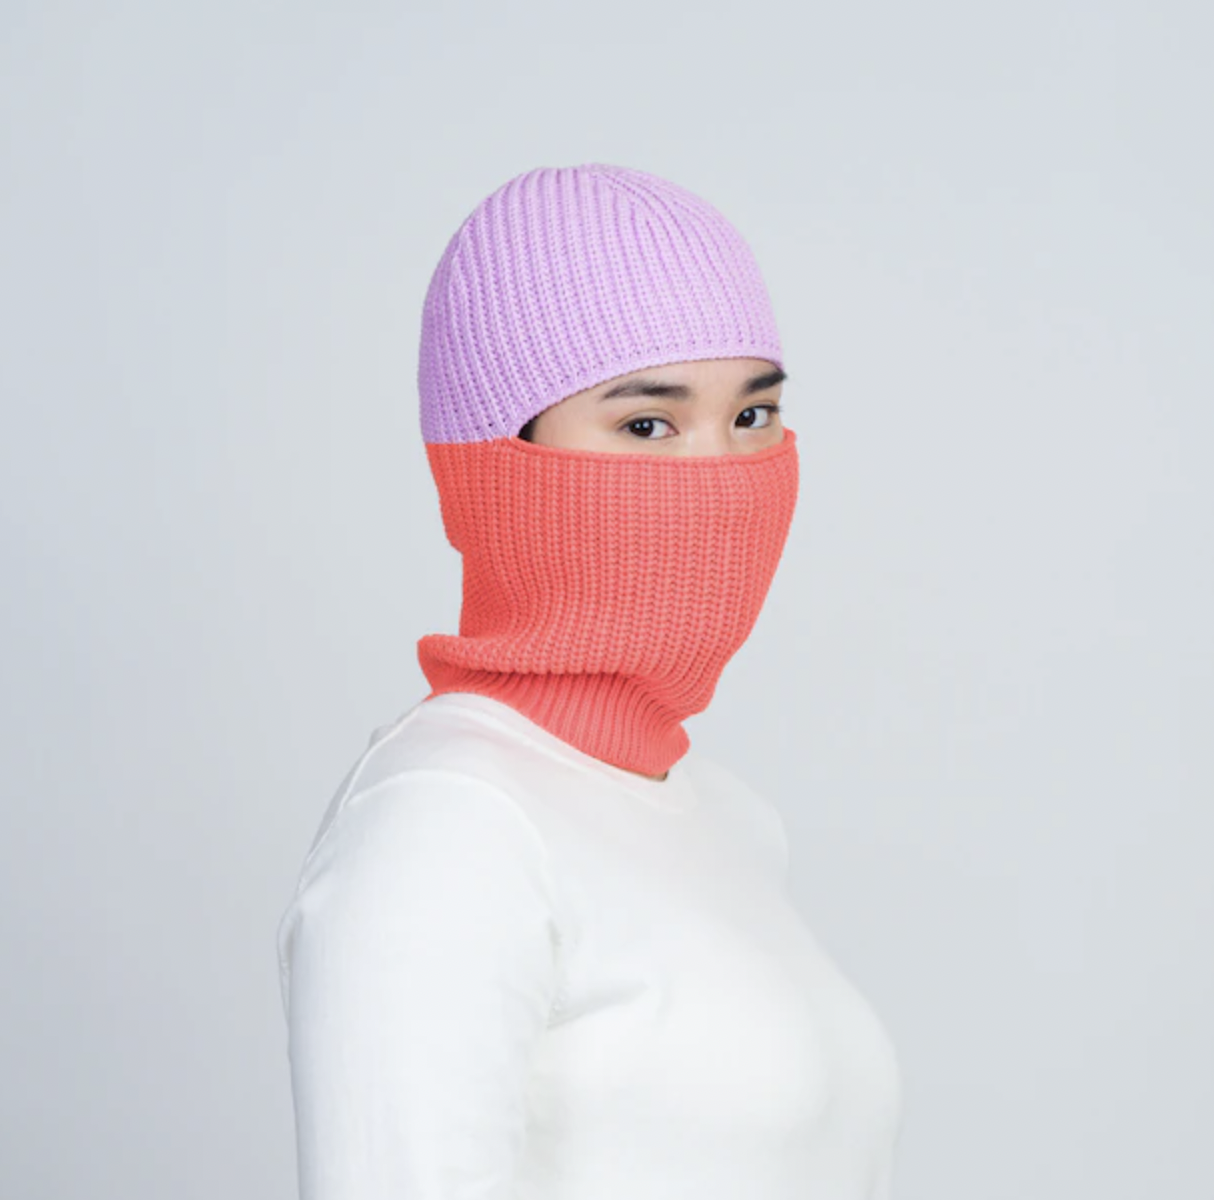 A person wearing the balaclava with a long-sleeve shirt